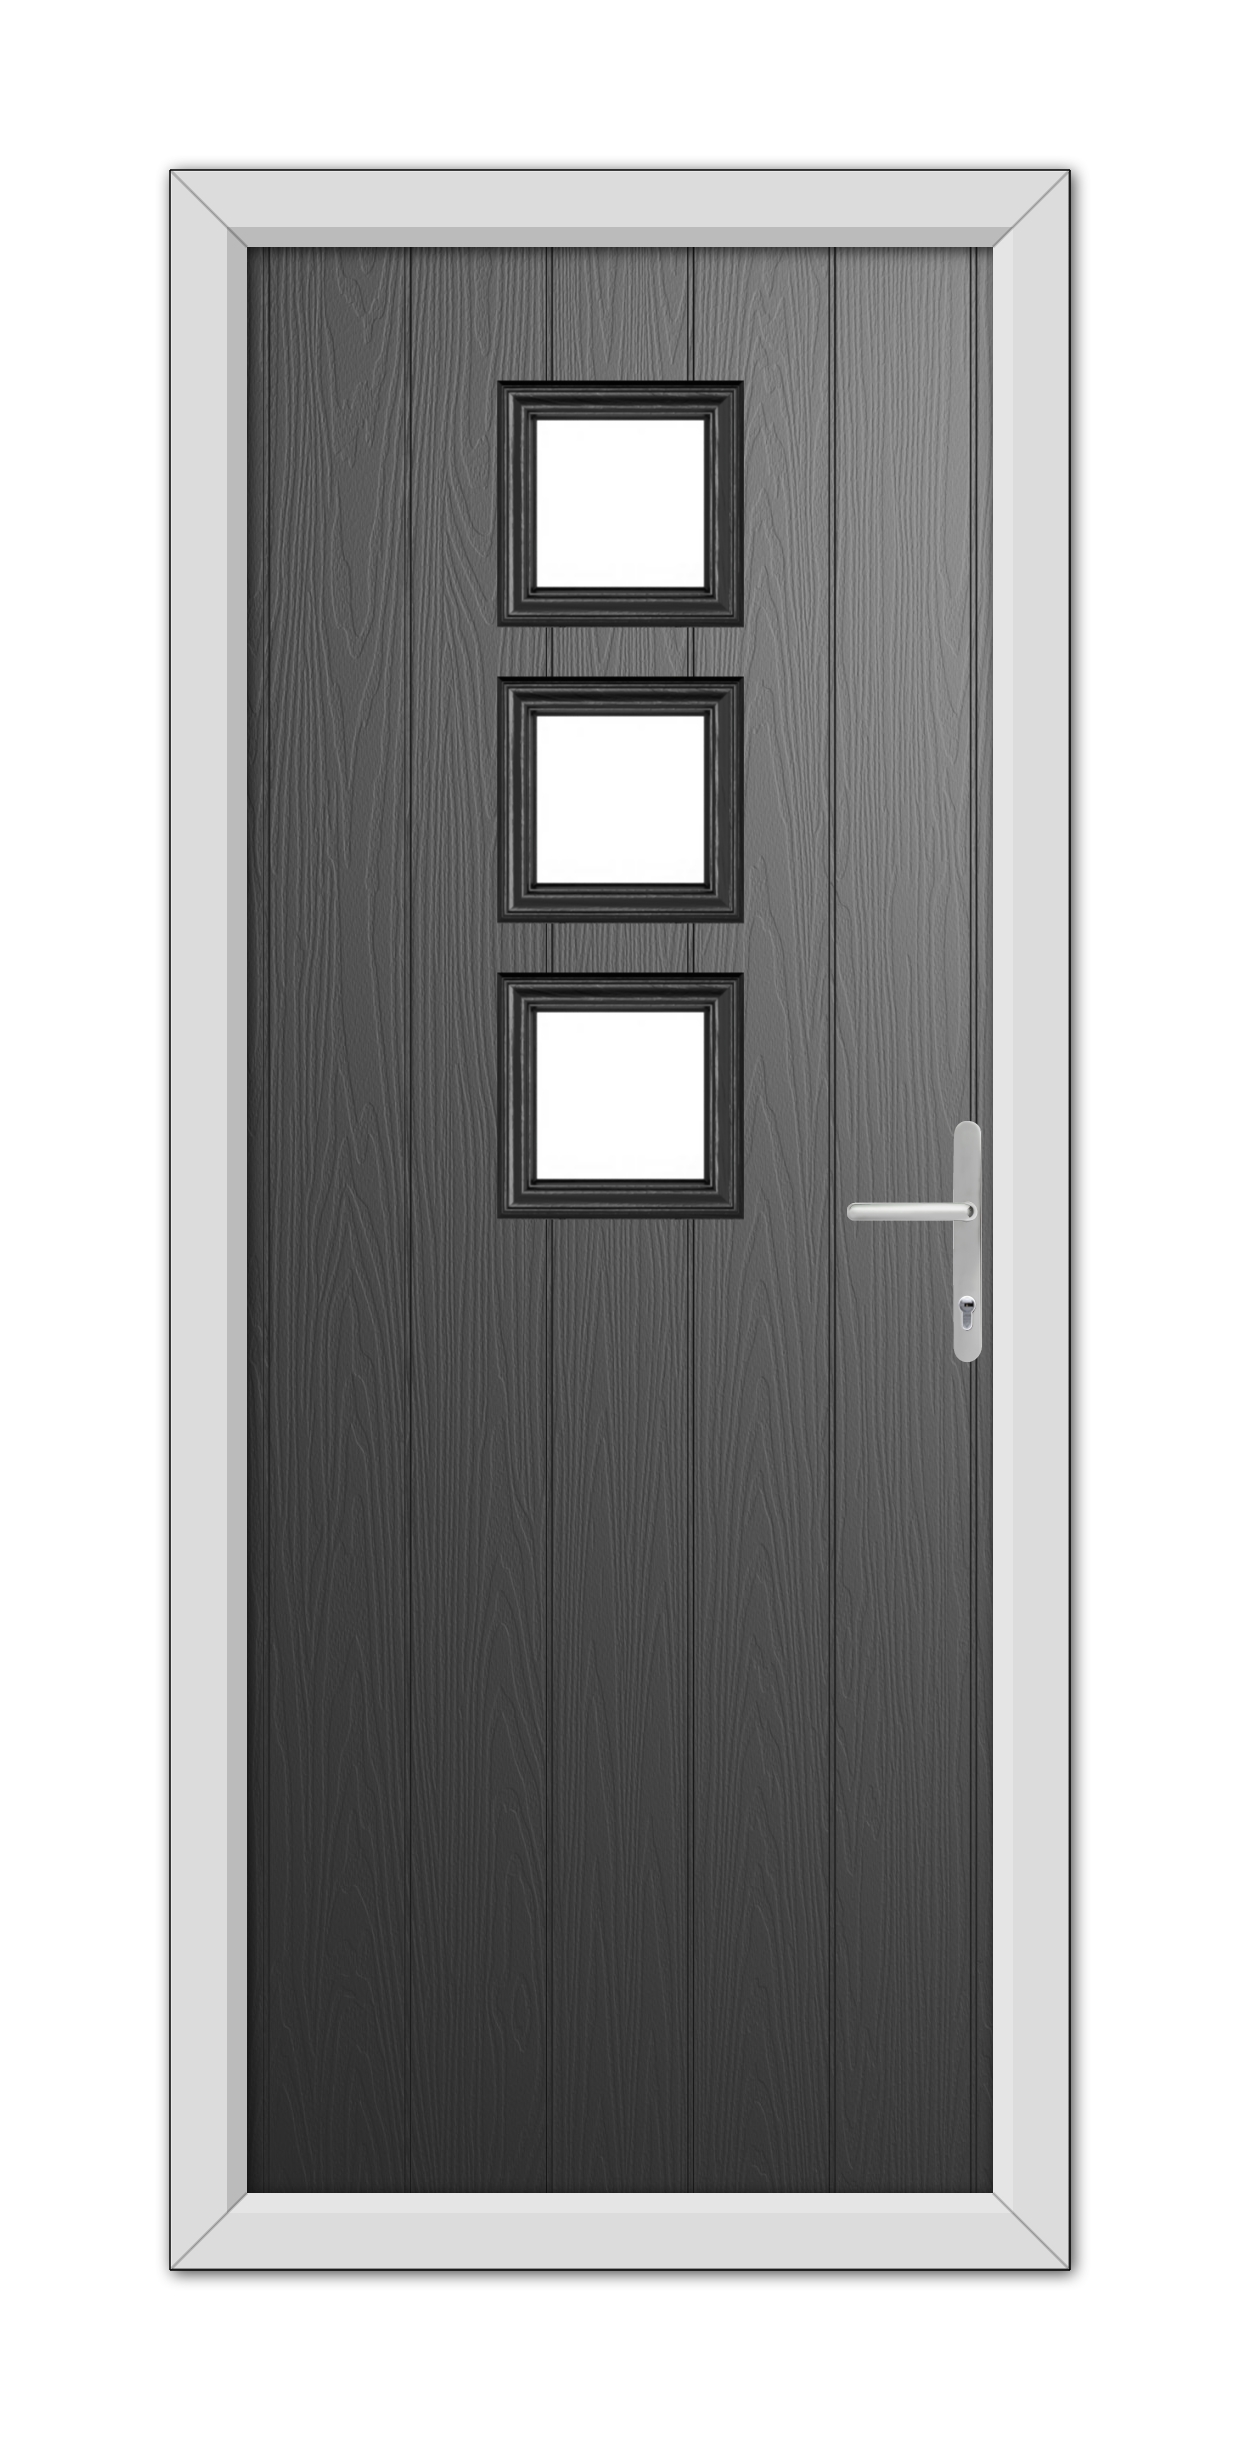 A Black Montrose Composite Door 48mm Timber Core with a white frame, featuring three small rectangular windows and a silver handle on the right side.